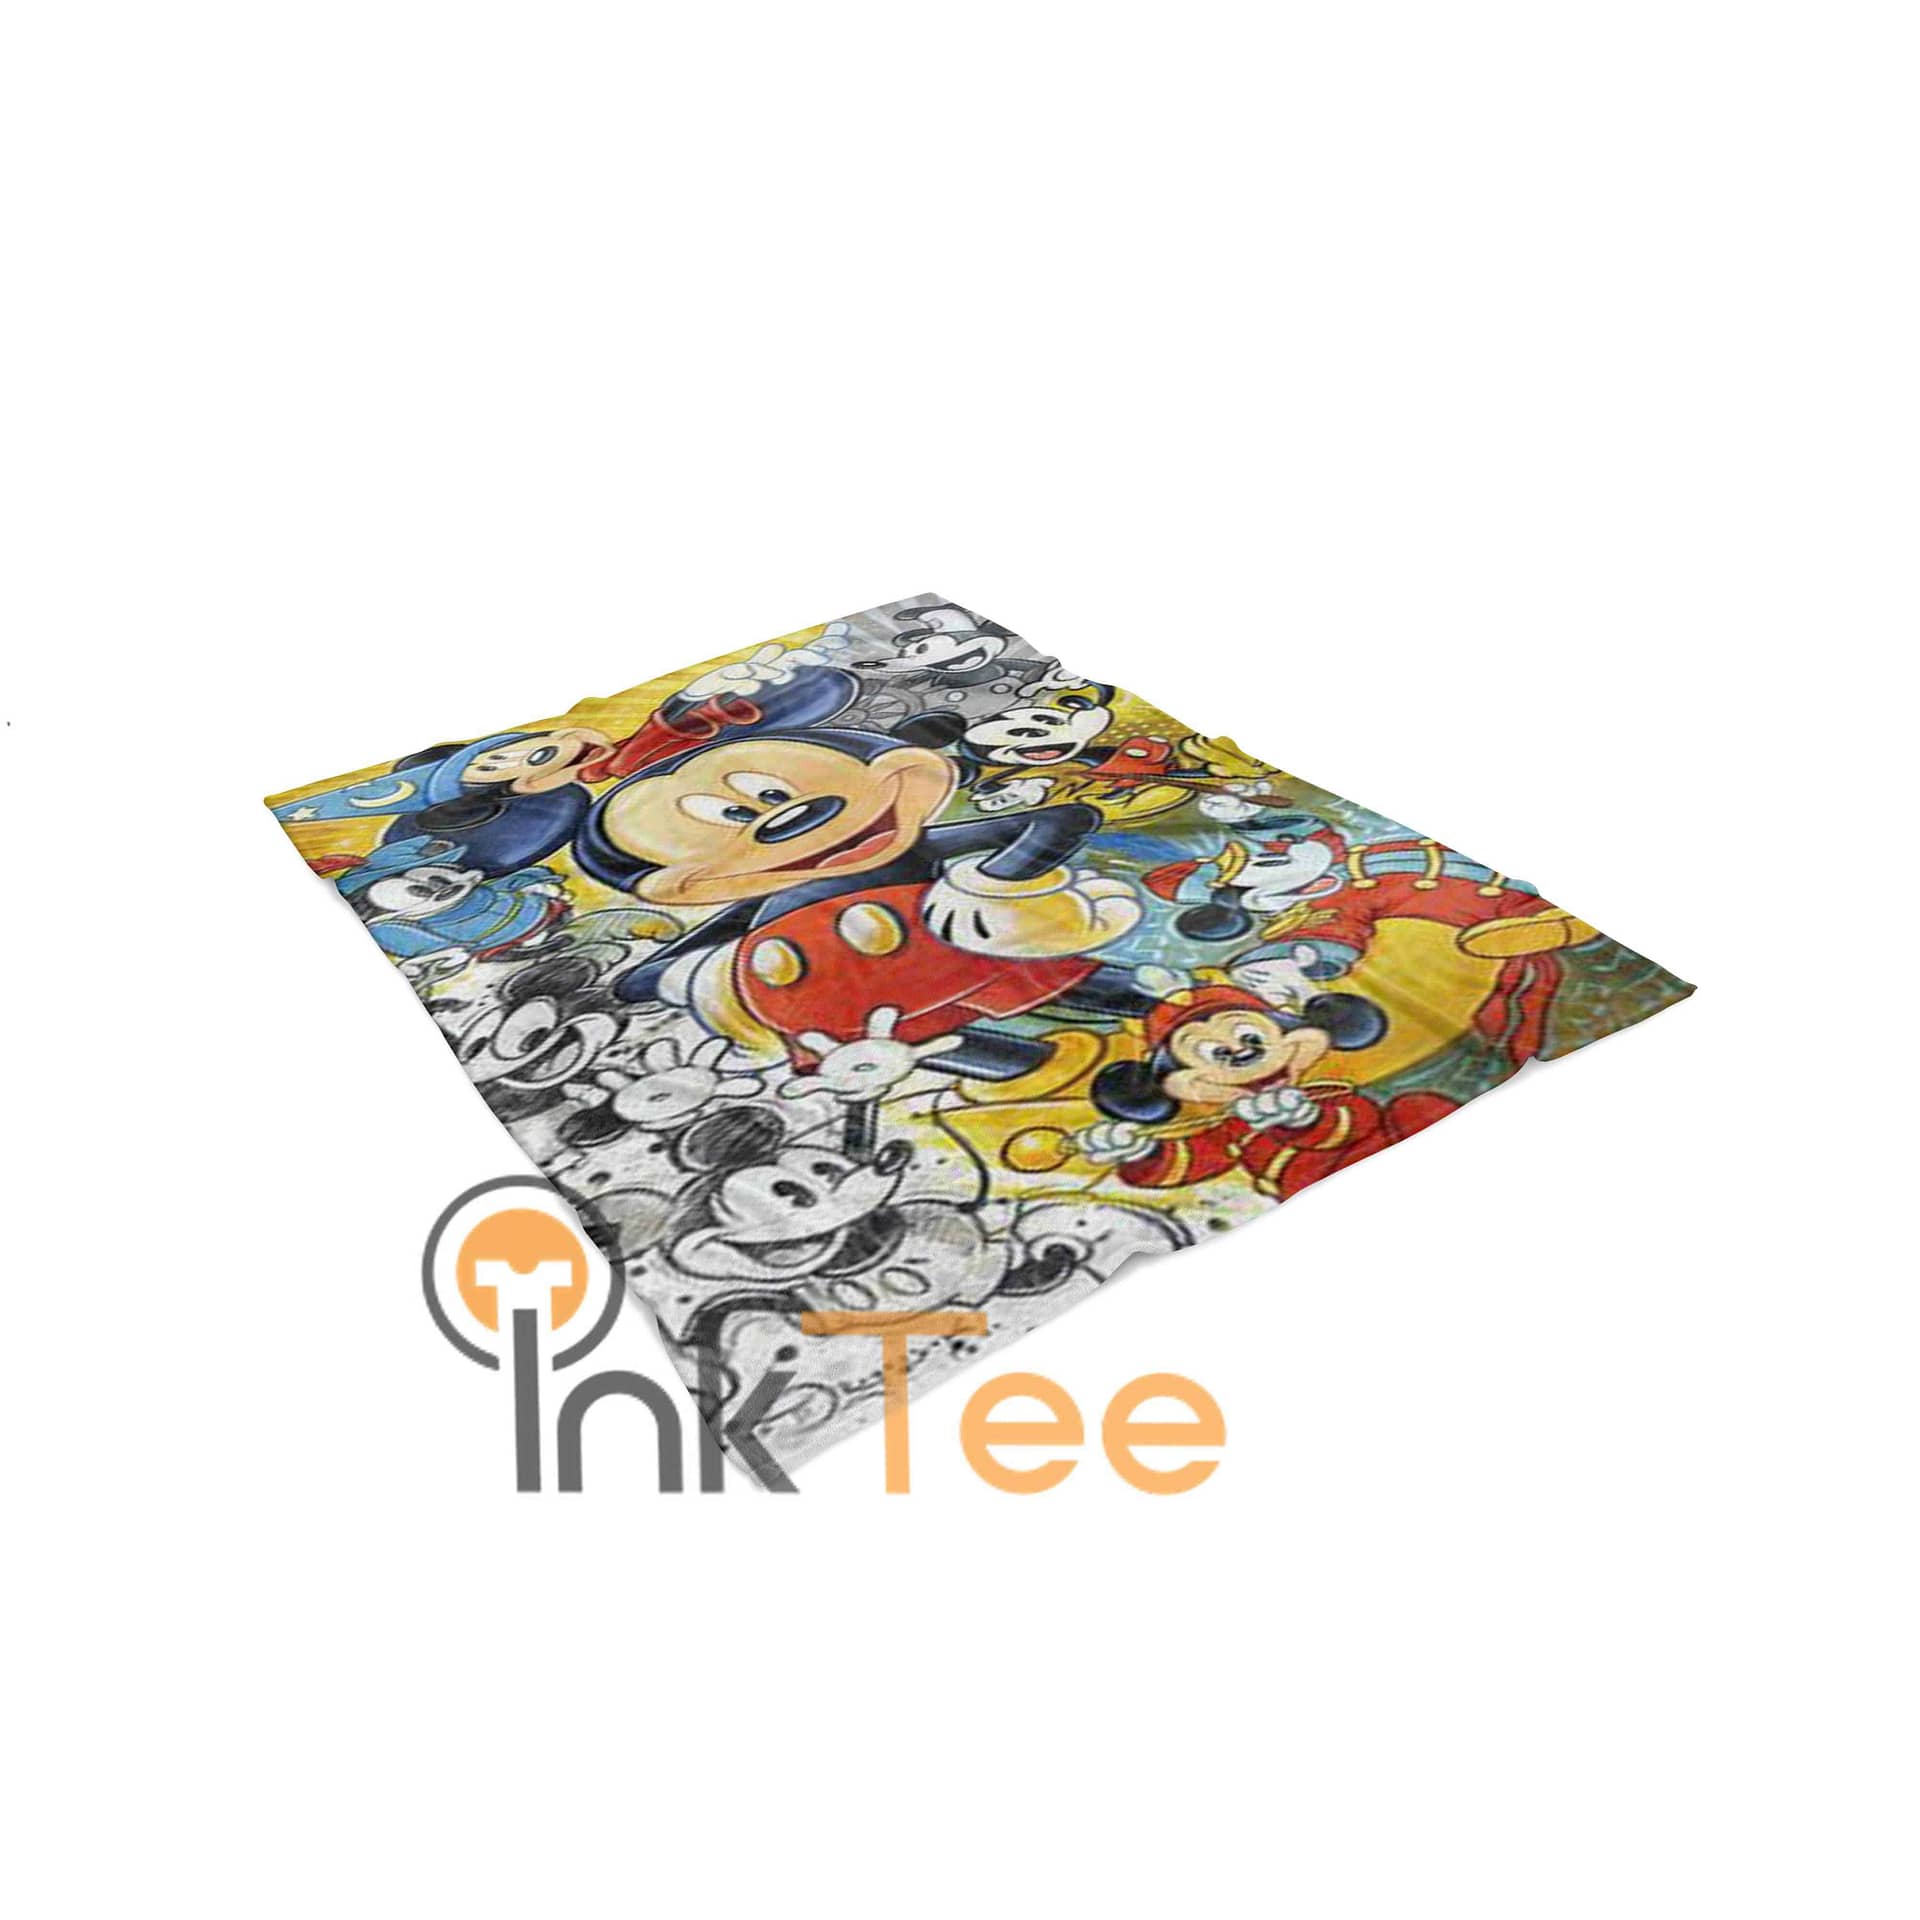 Inktee Store - Colorful Mickey Mouse Limited Edition Area Amazon Best Seller 4109 Fleece Blanket Image